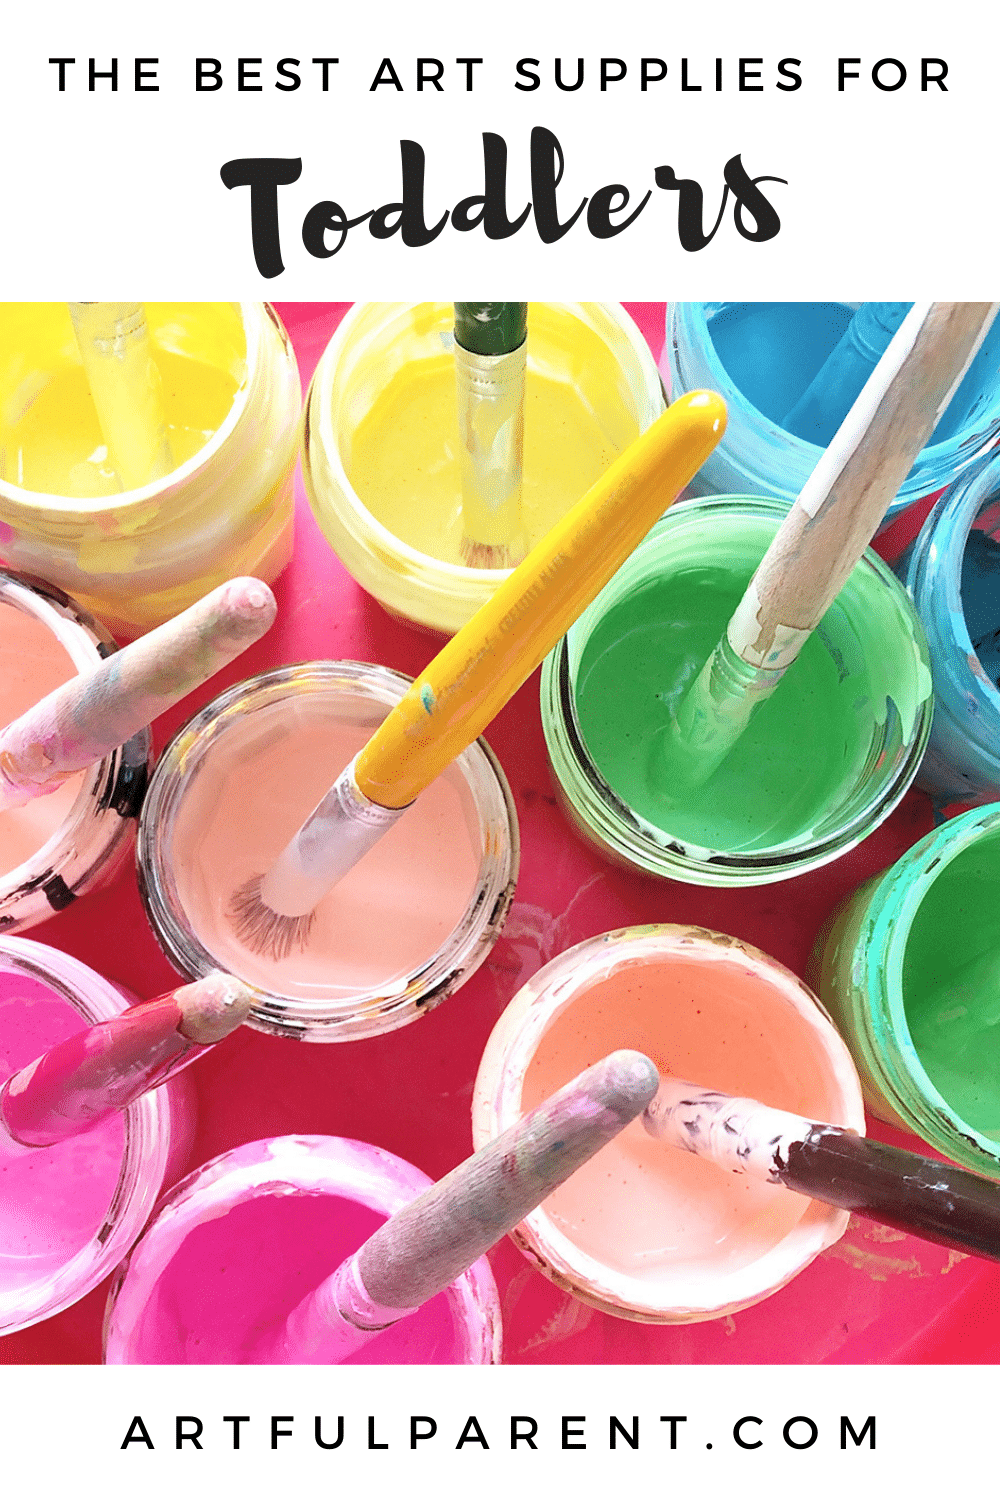 The best art supplies for toddlers